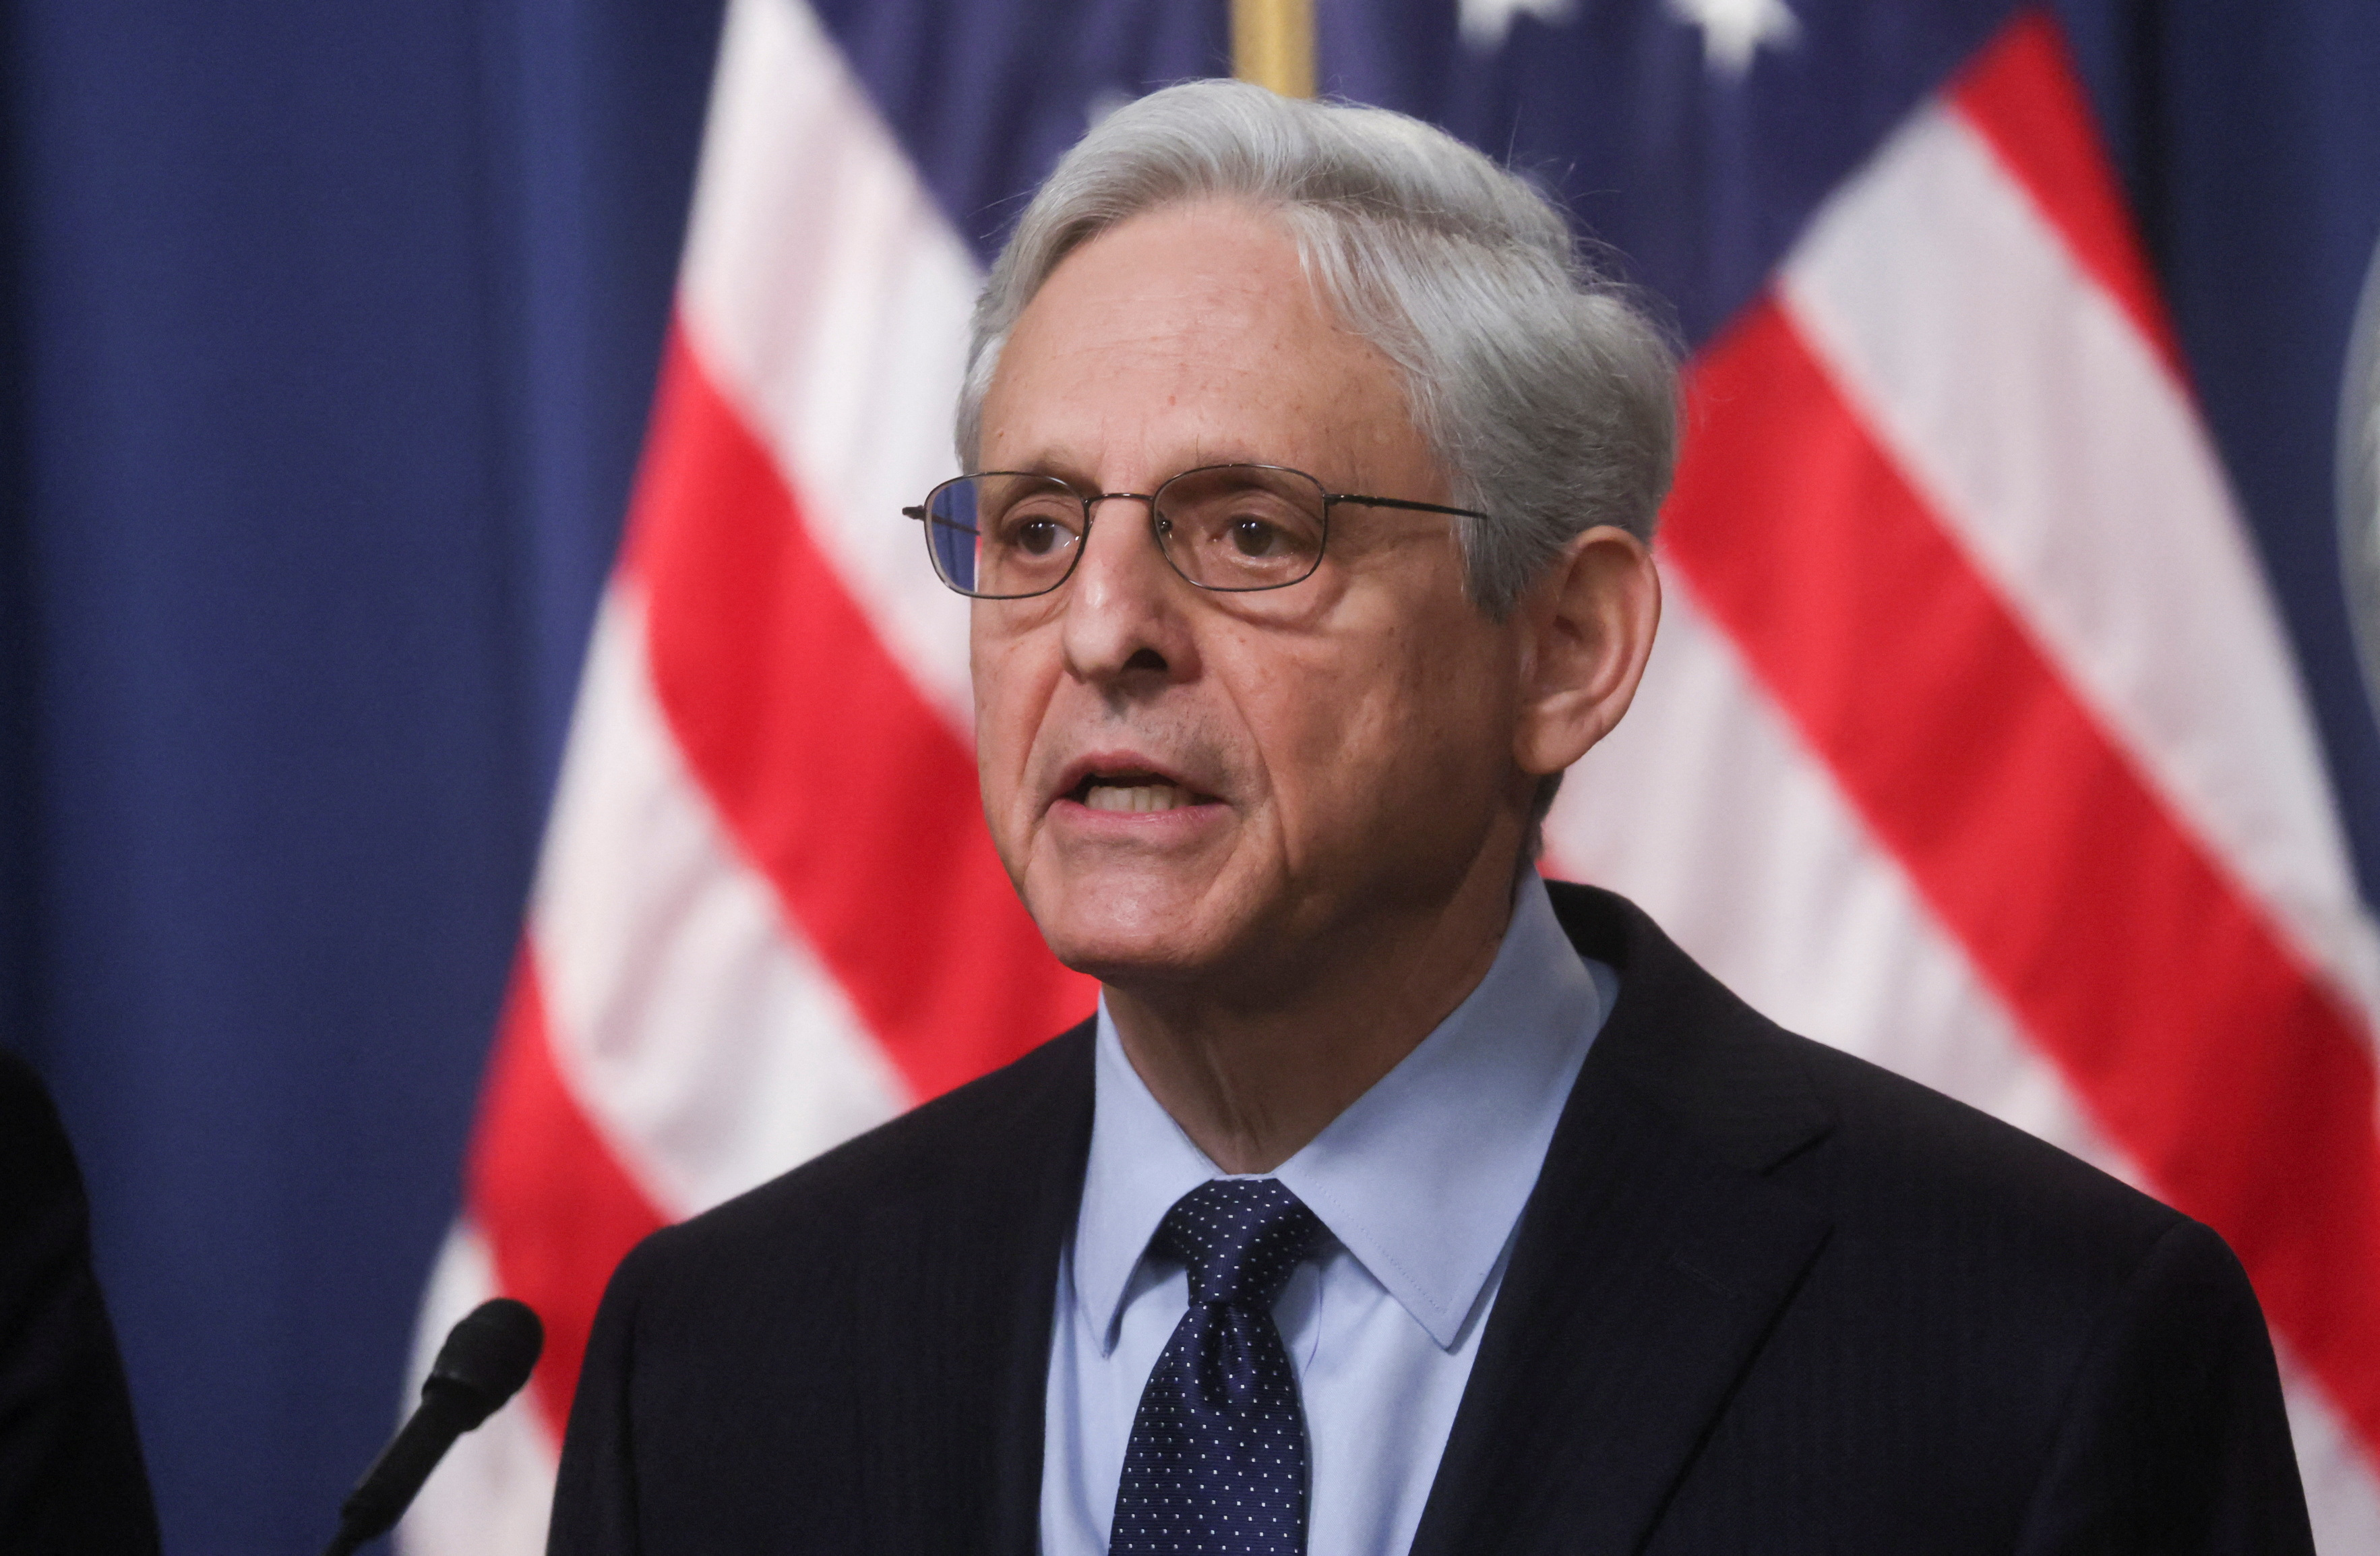 Attorney General Merrick Garland has appointed former Maryland US Attorney Robert Hur as special counsel to investigate any potential wrongdoing surrounding the Biden documents.  (Reuters)